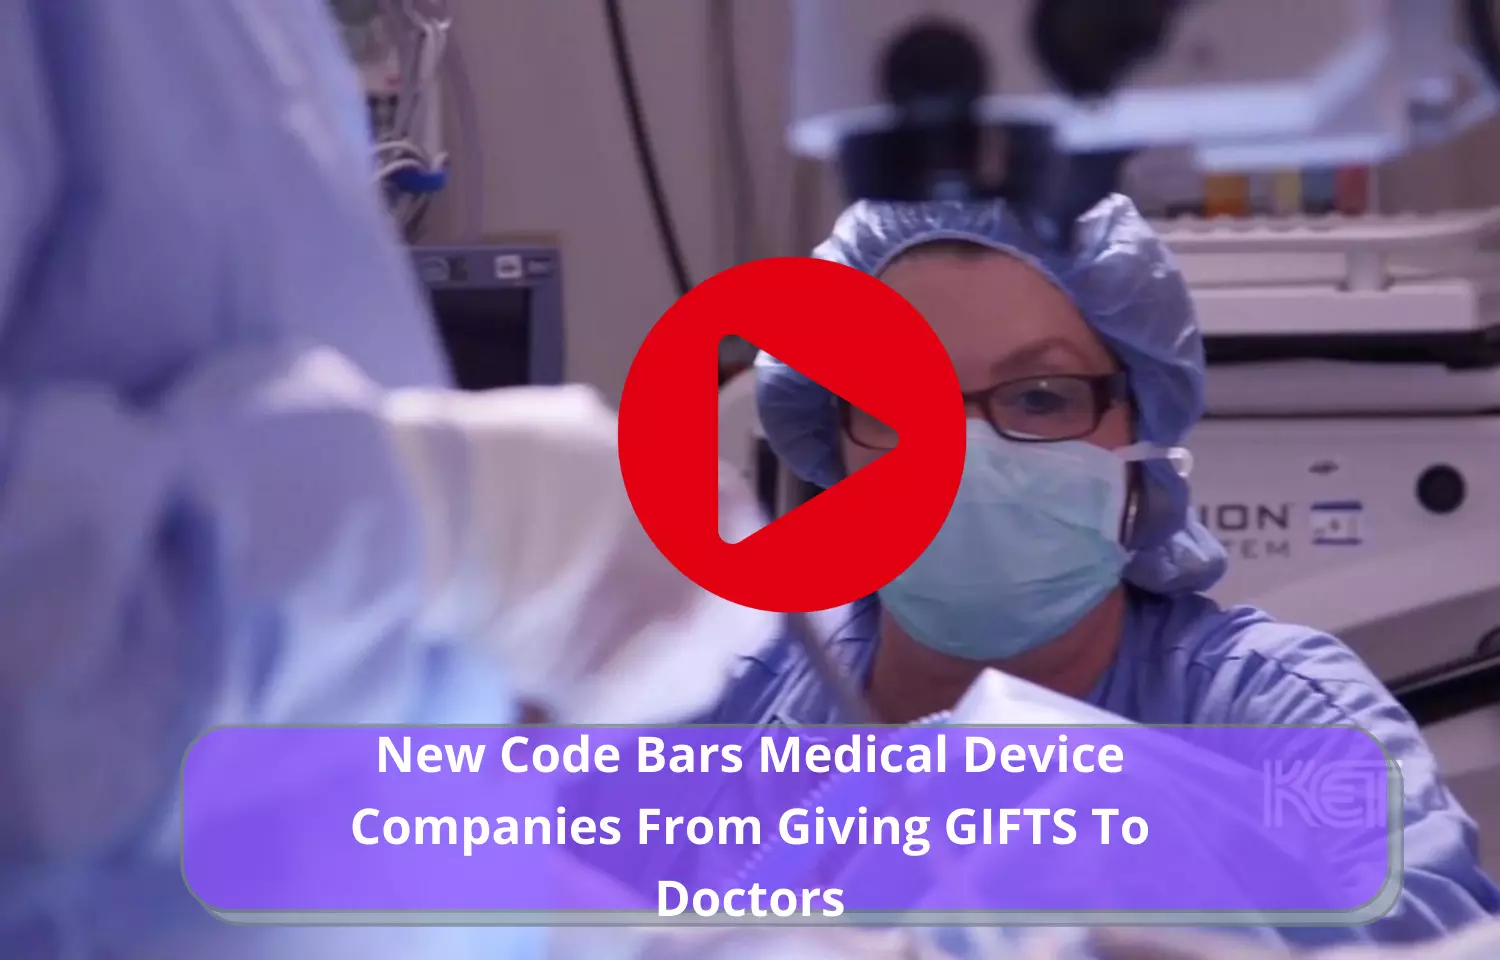 New Code Bars Medical Device Companies From Giving GIFTS To Doctors